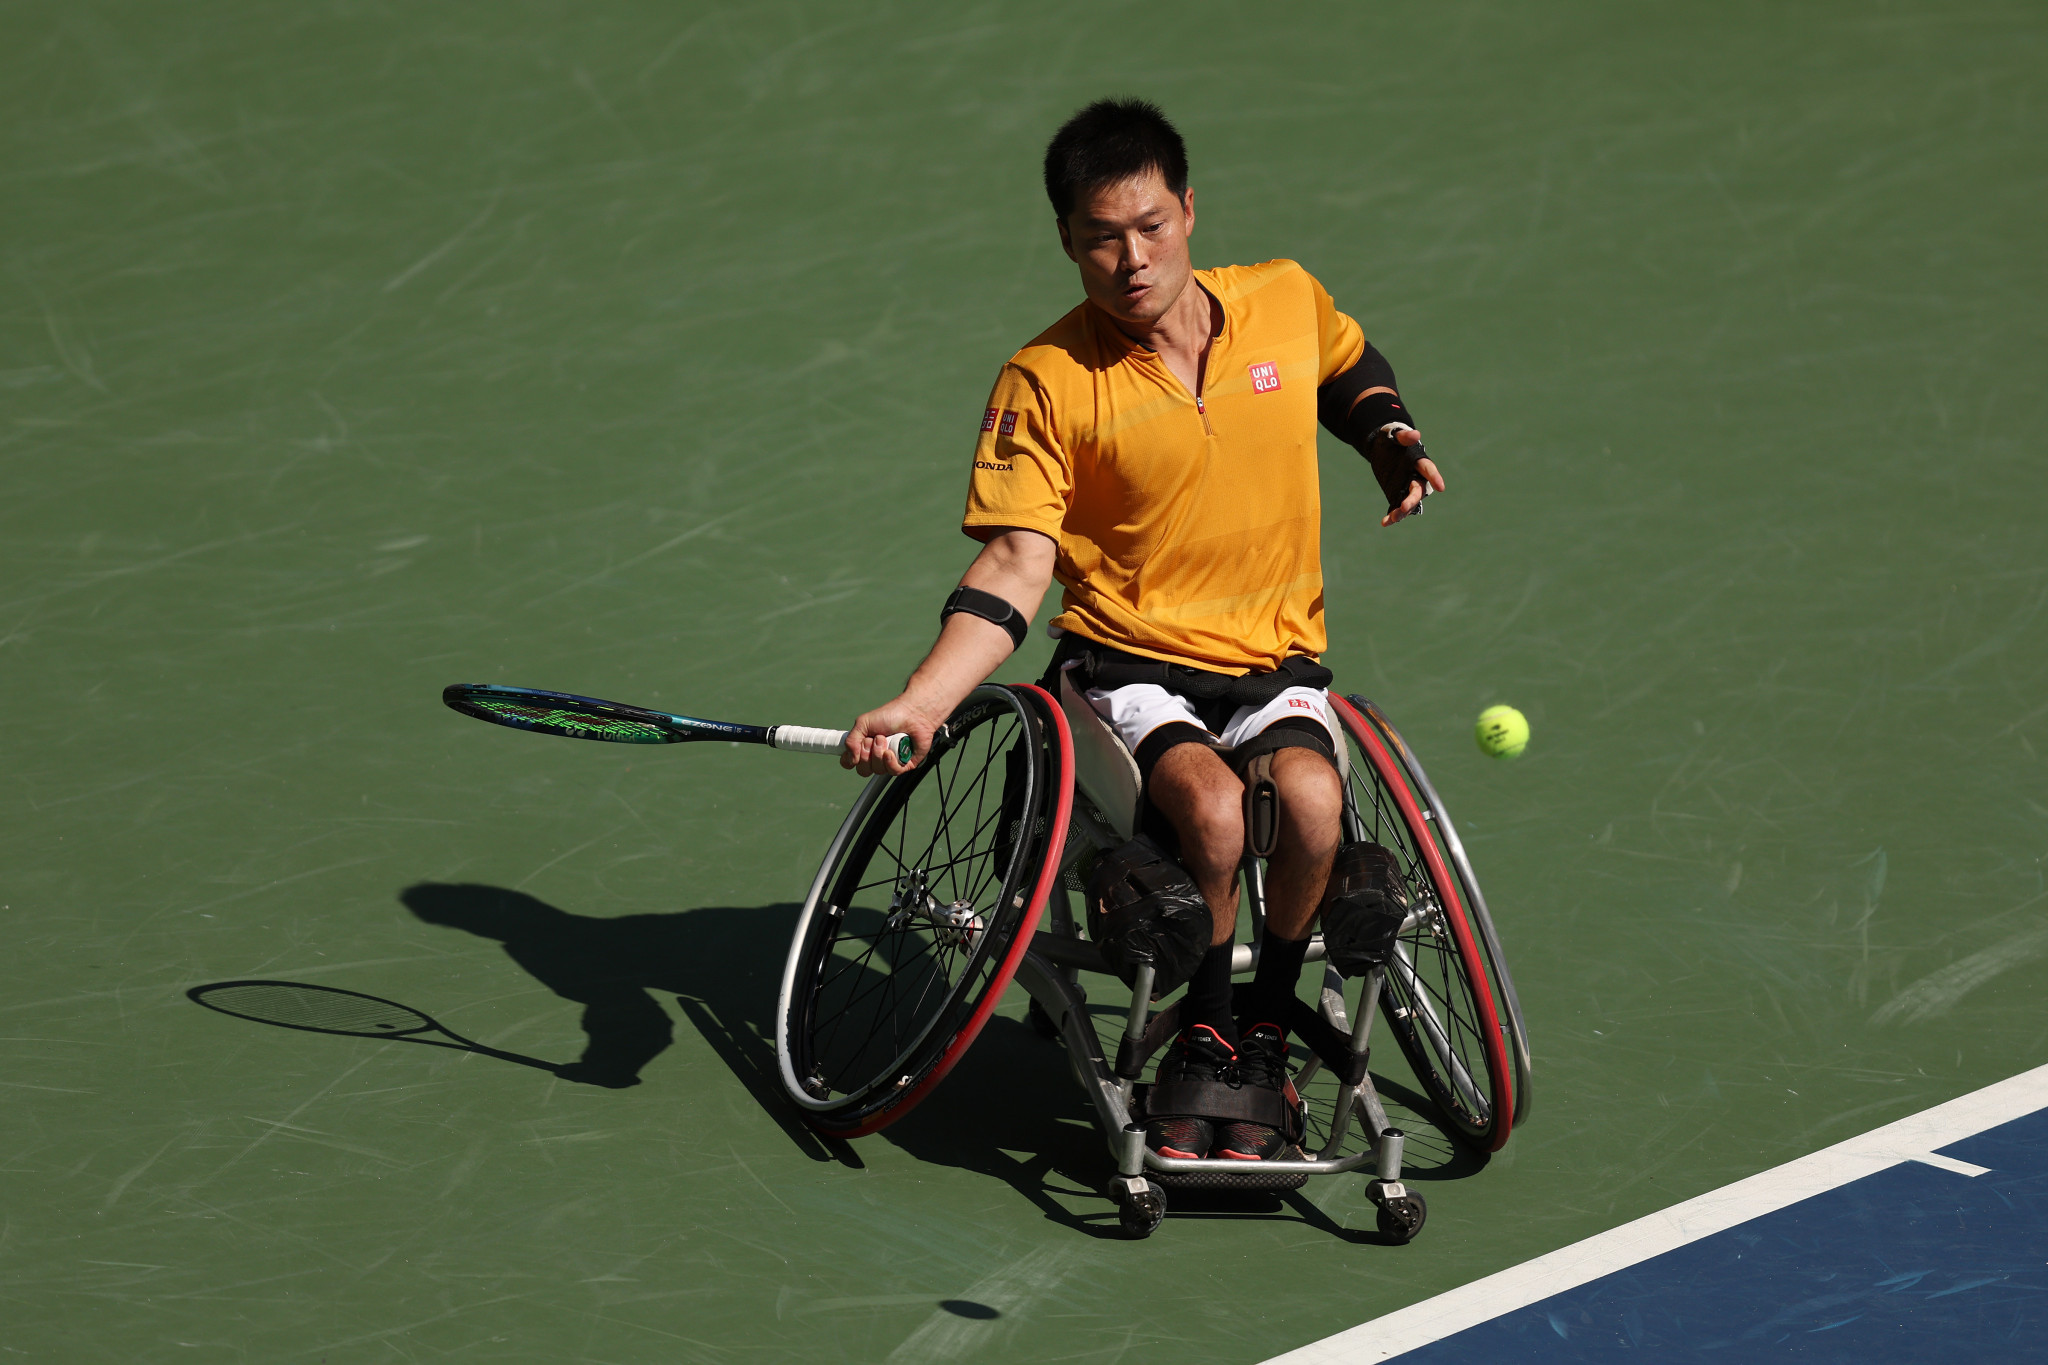 Top seed Shingo Kunieda of Japan reached the final of the men's wheelchair singles event at the US Open ©Getty Images